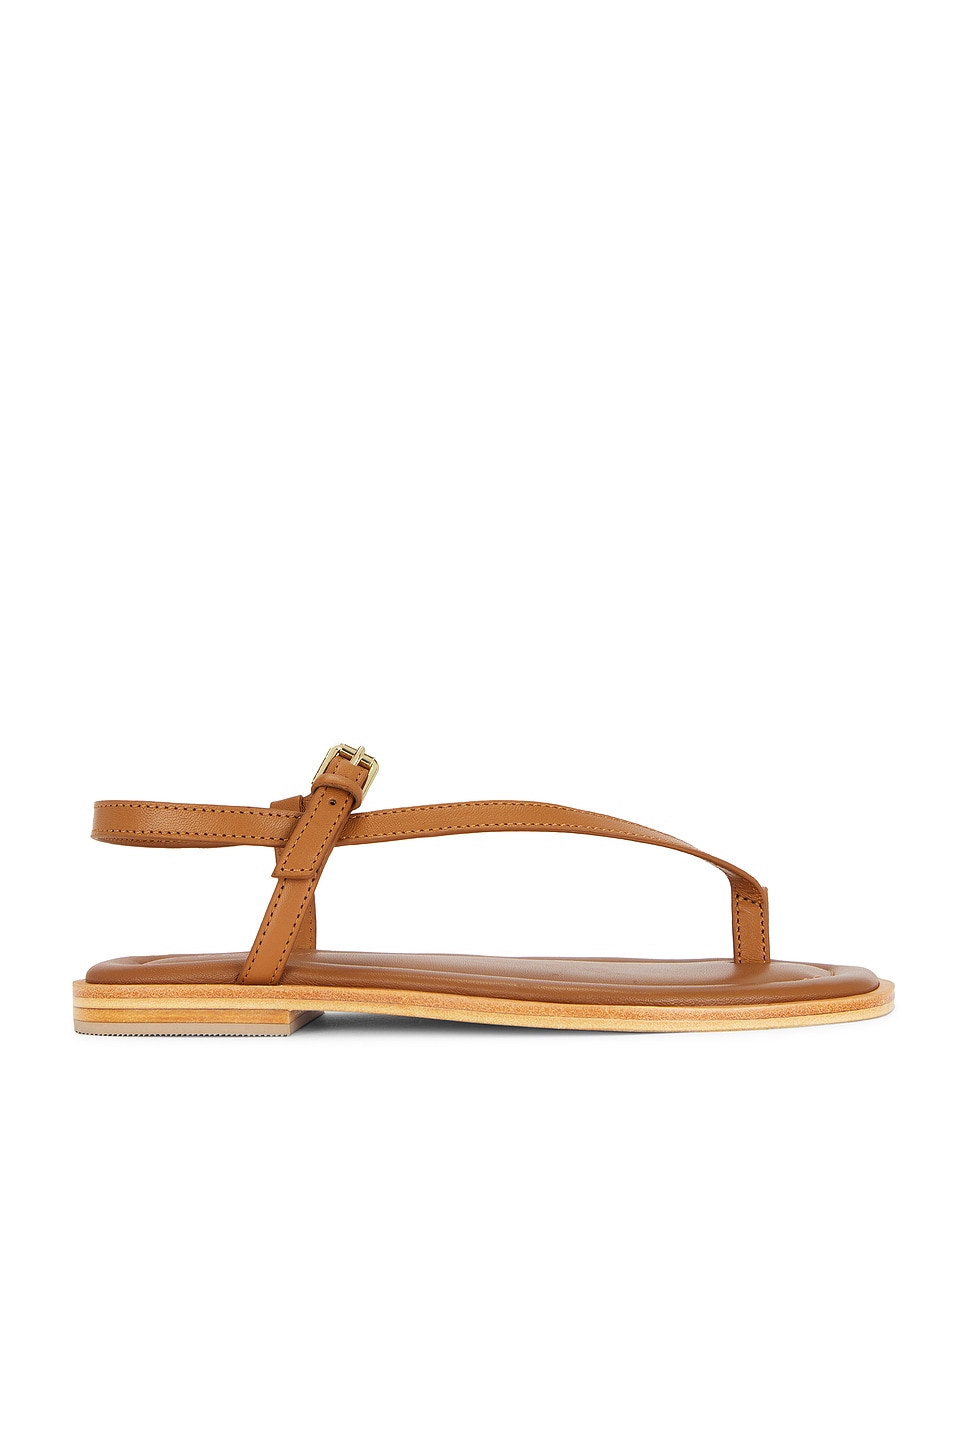 Image 1 of A.EMERY Pae Sandal in Deep Tan